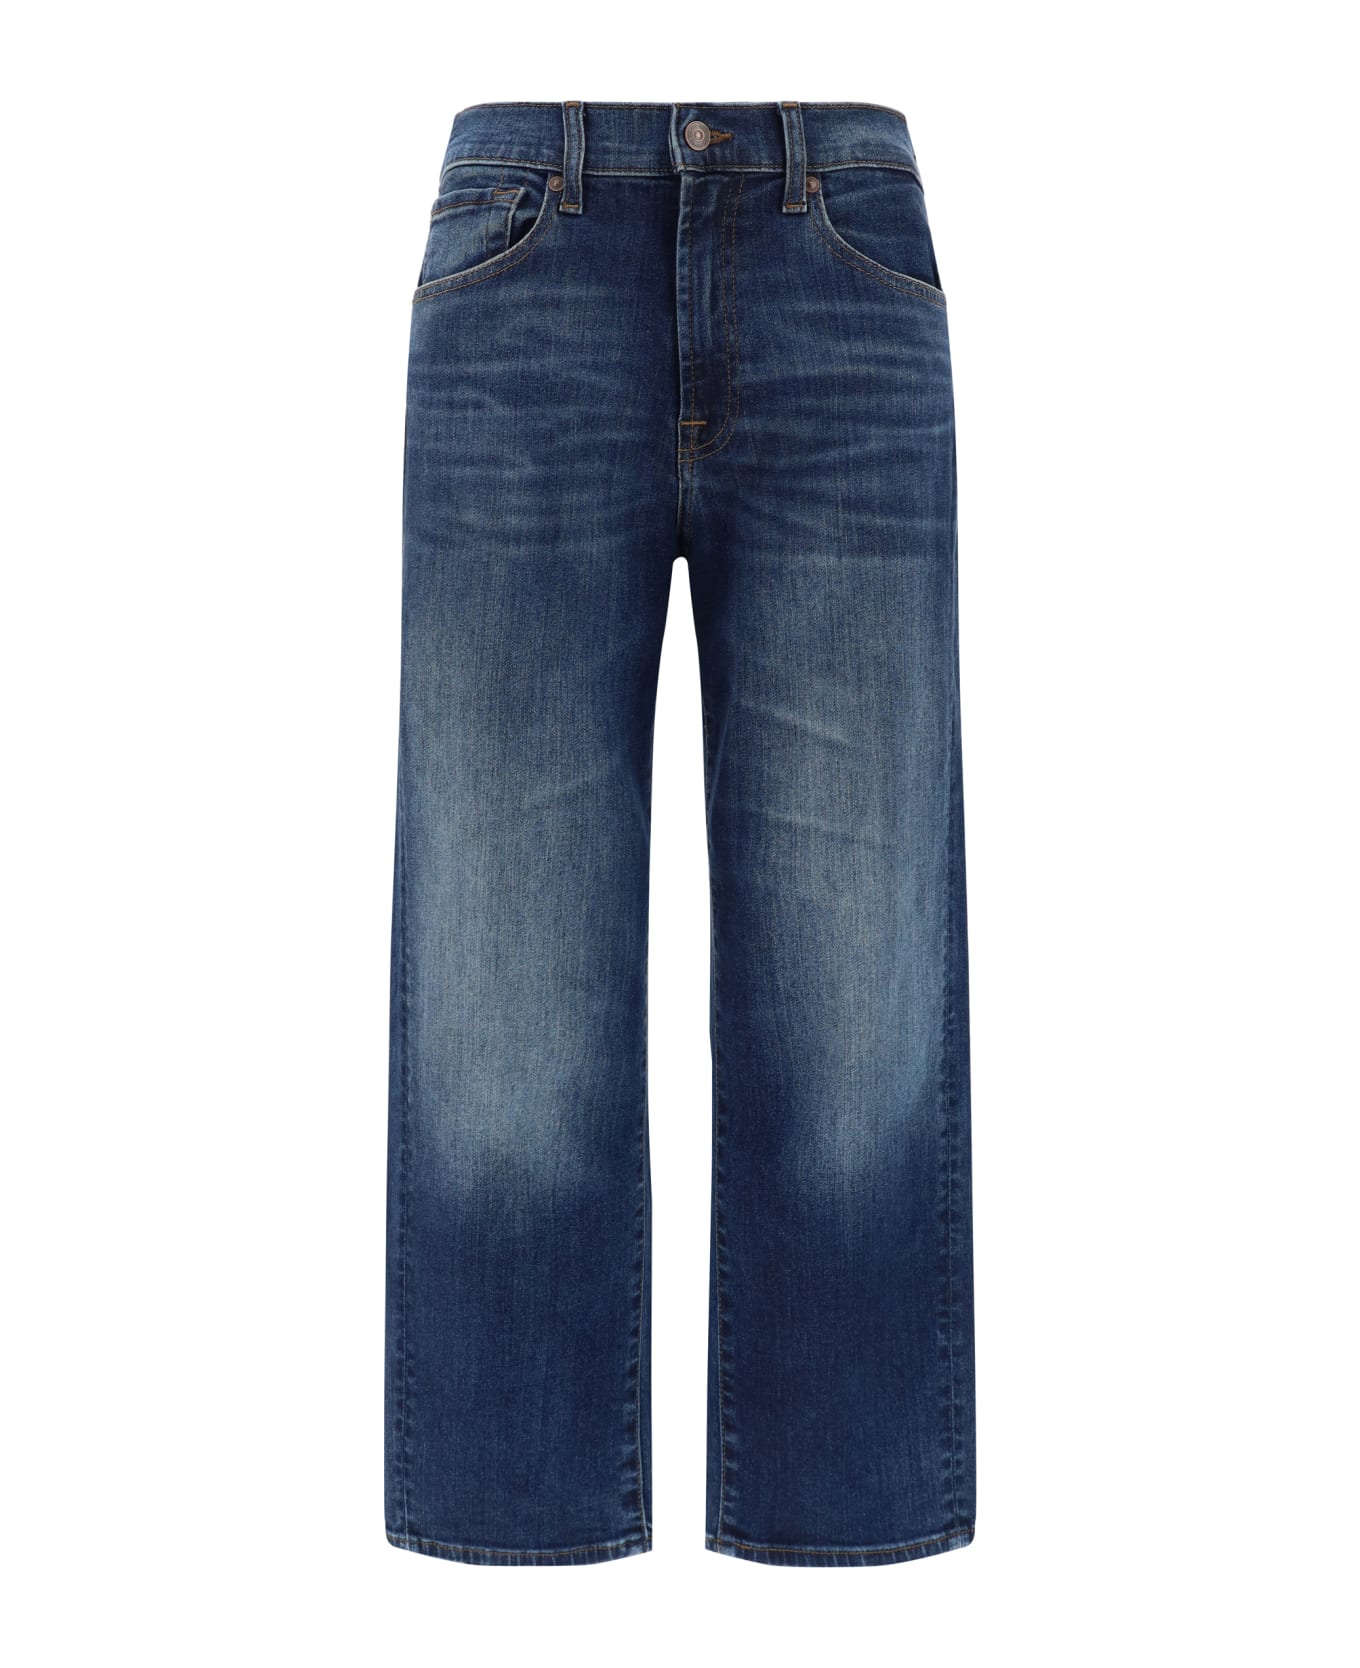 7 For All Mankind Jeans - Dark Blue